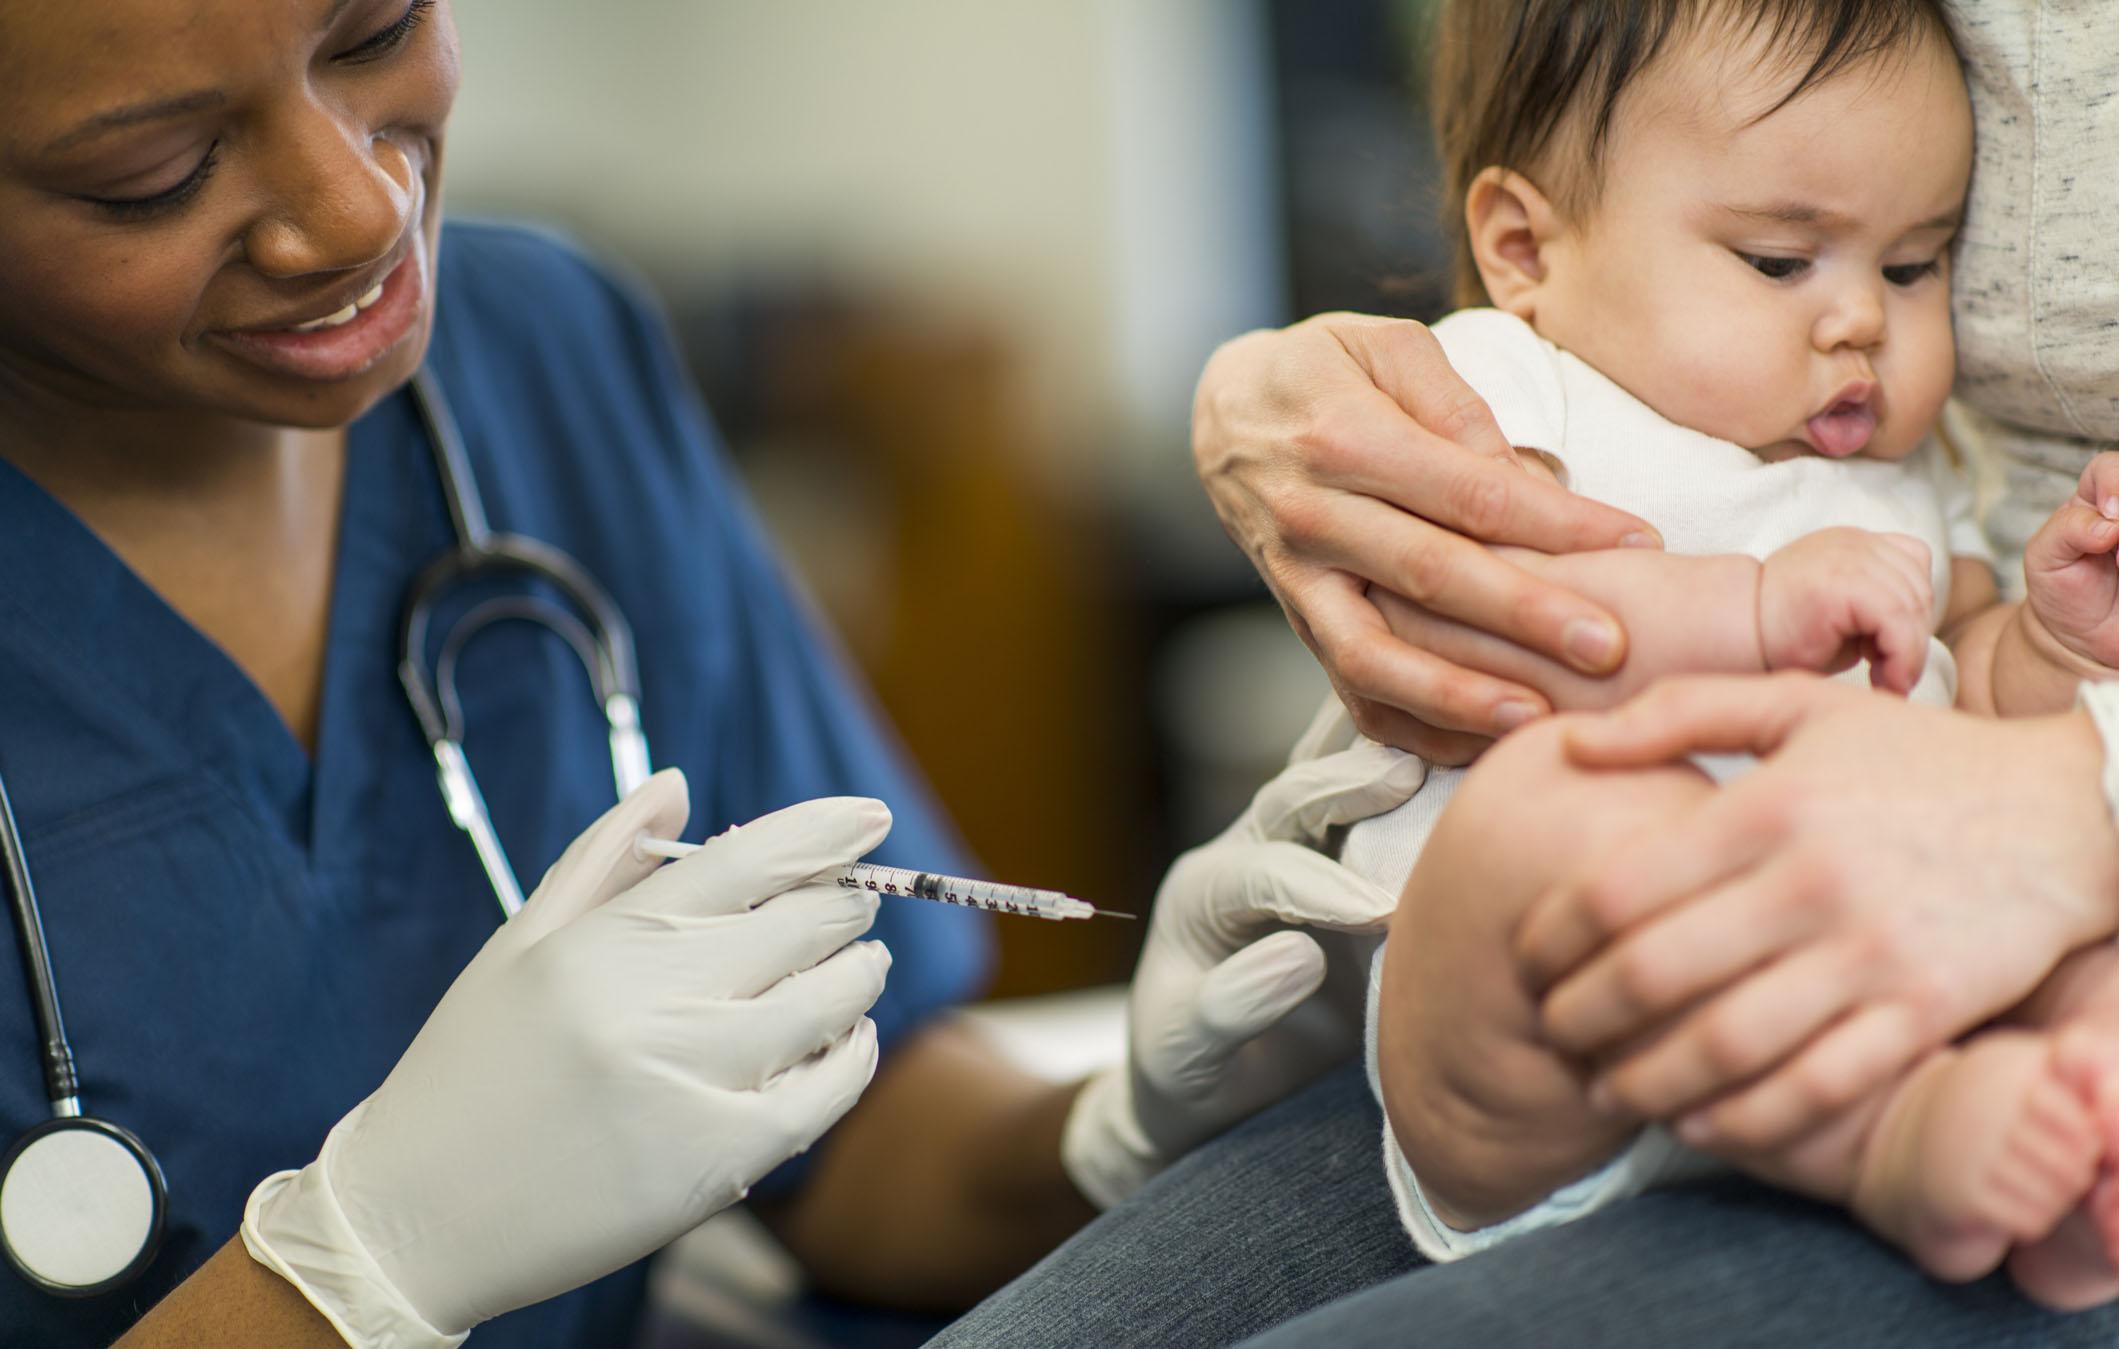 Public Health Leaders Call for New Efforts to Promote Vaccination Acceptance